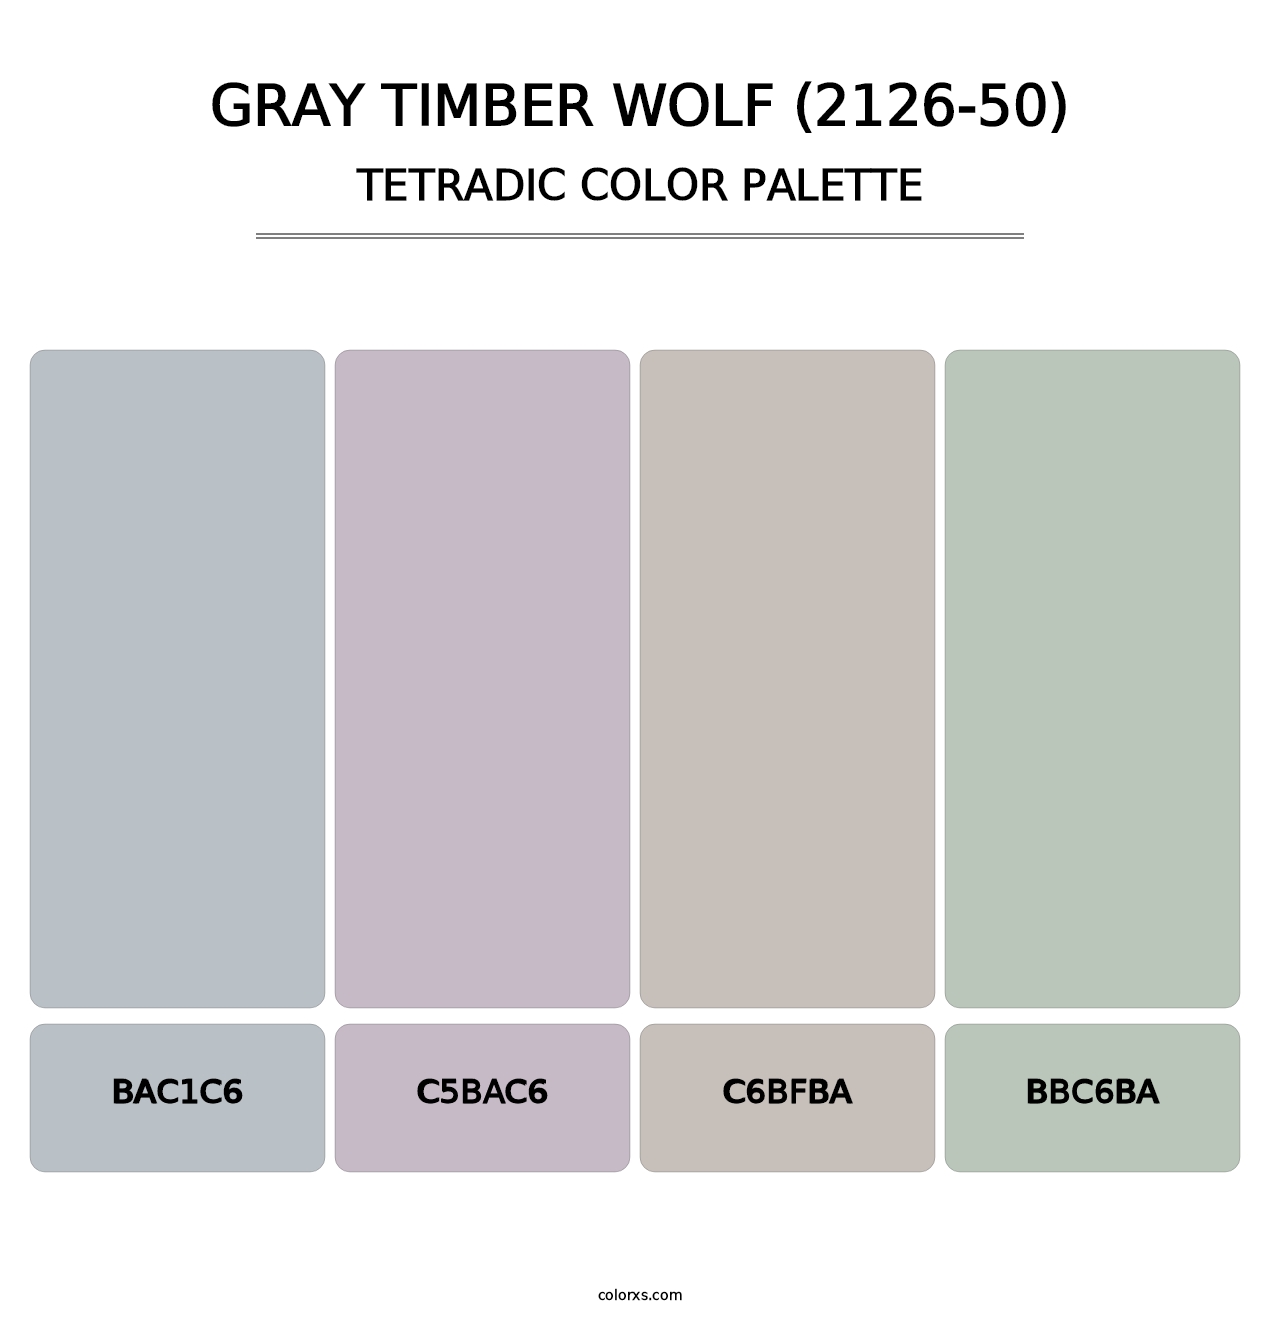 Gray Timber Wolf (2126-50) - Tetradic Color Palette